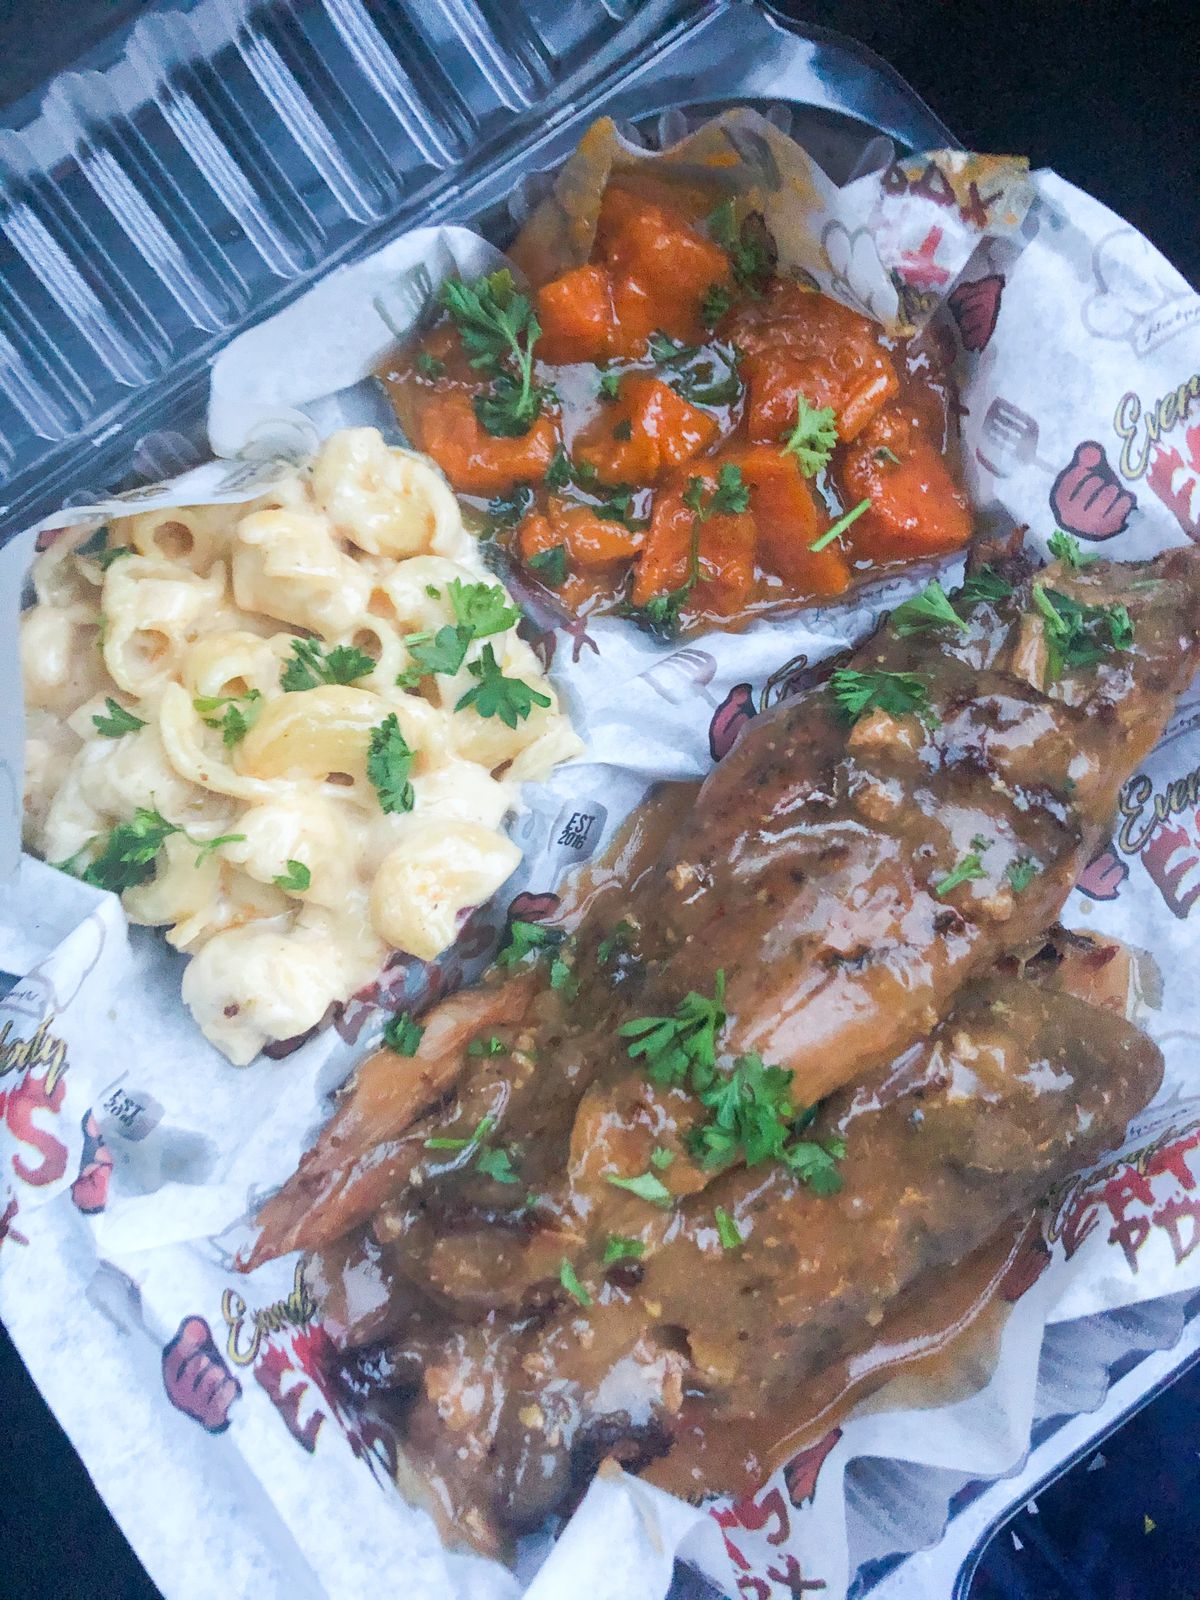 A takeout container of mac and cheese, yams, and turkey legs arrives with a sprinkle of parsley at Everybody Eats